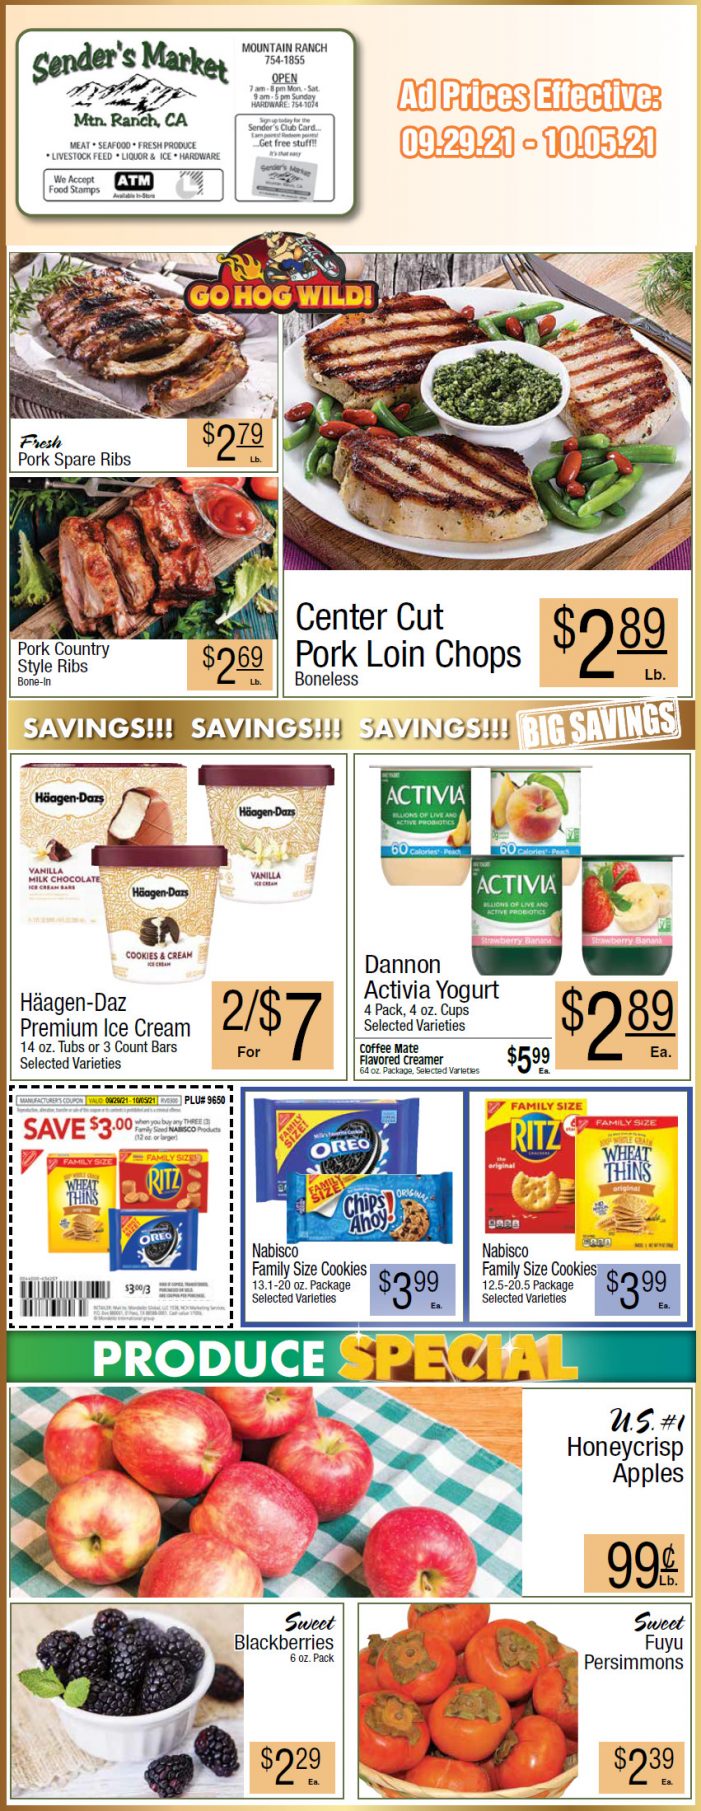 Sender’s Market’s Weekly Ad & Grocery Specials Through October 5th! Shop Local & Save!